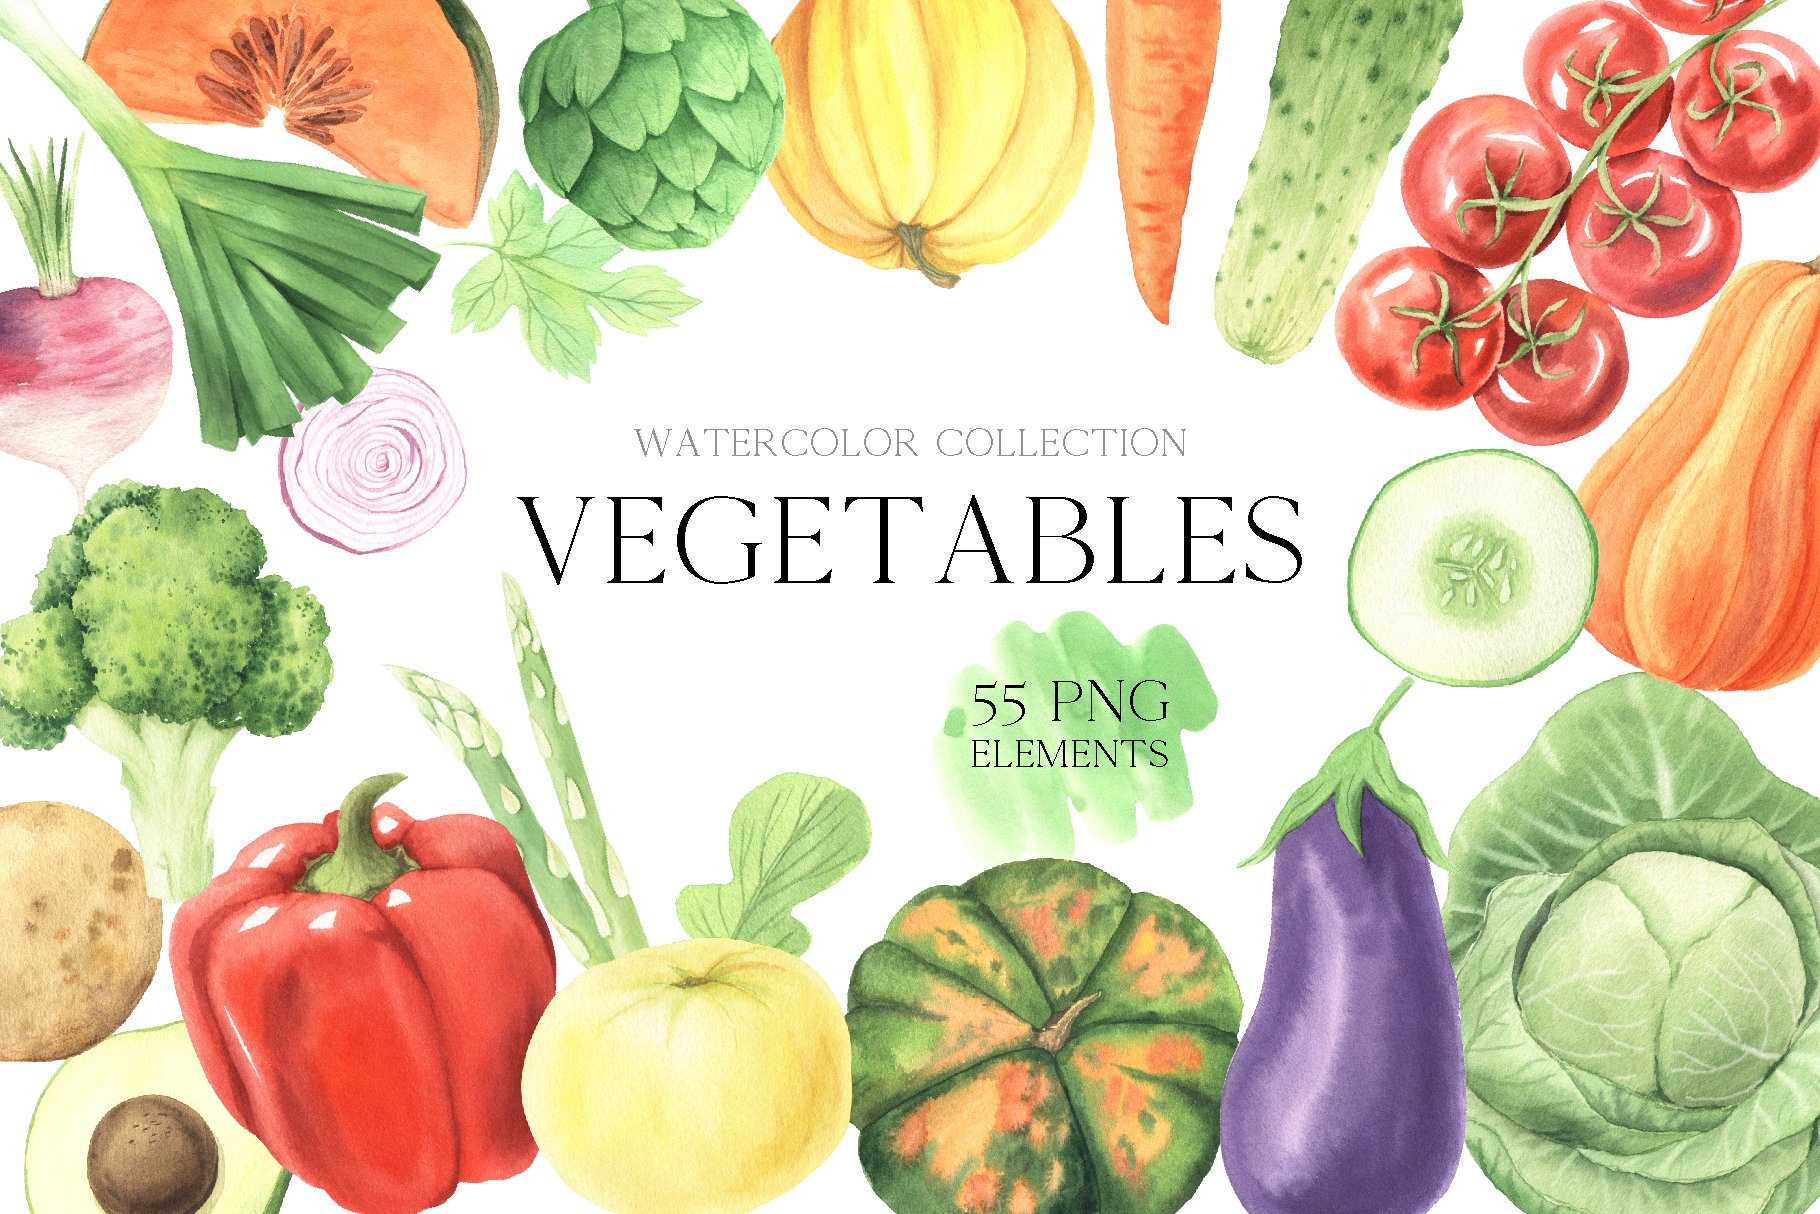 Watercolor Vegetables clipart cover image.